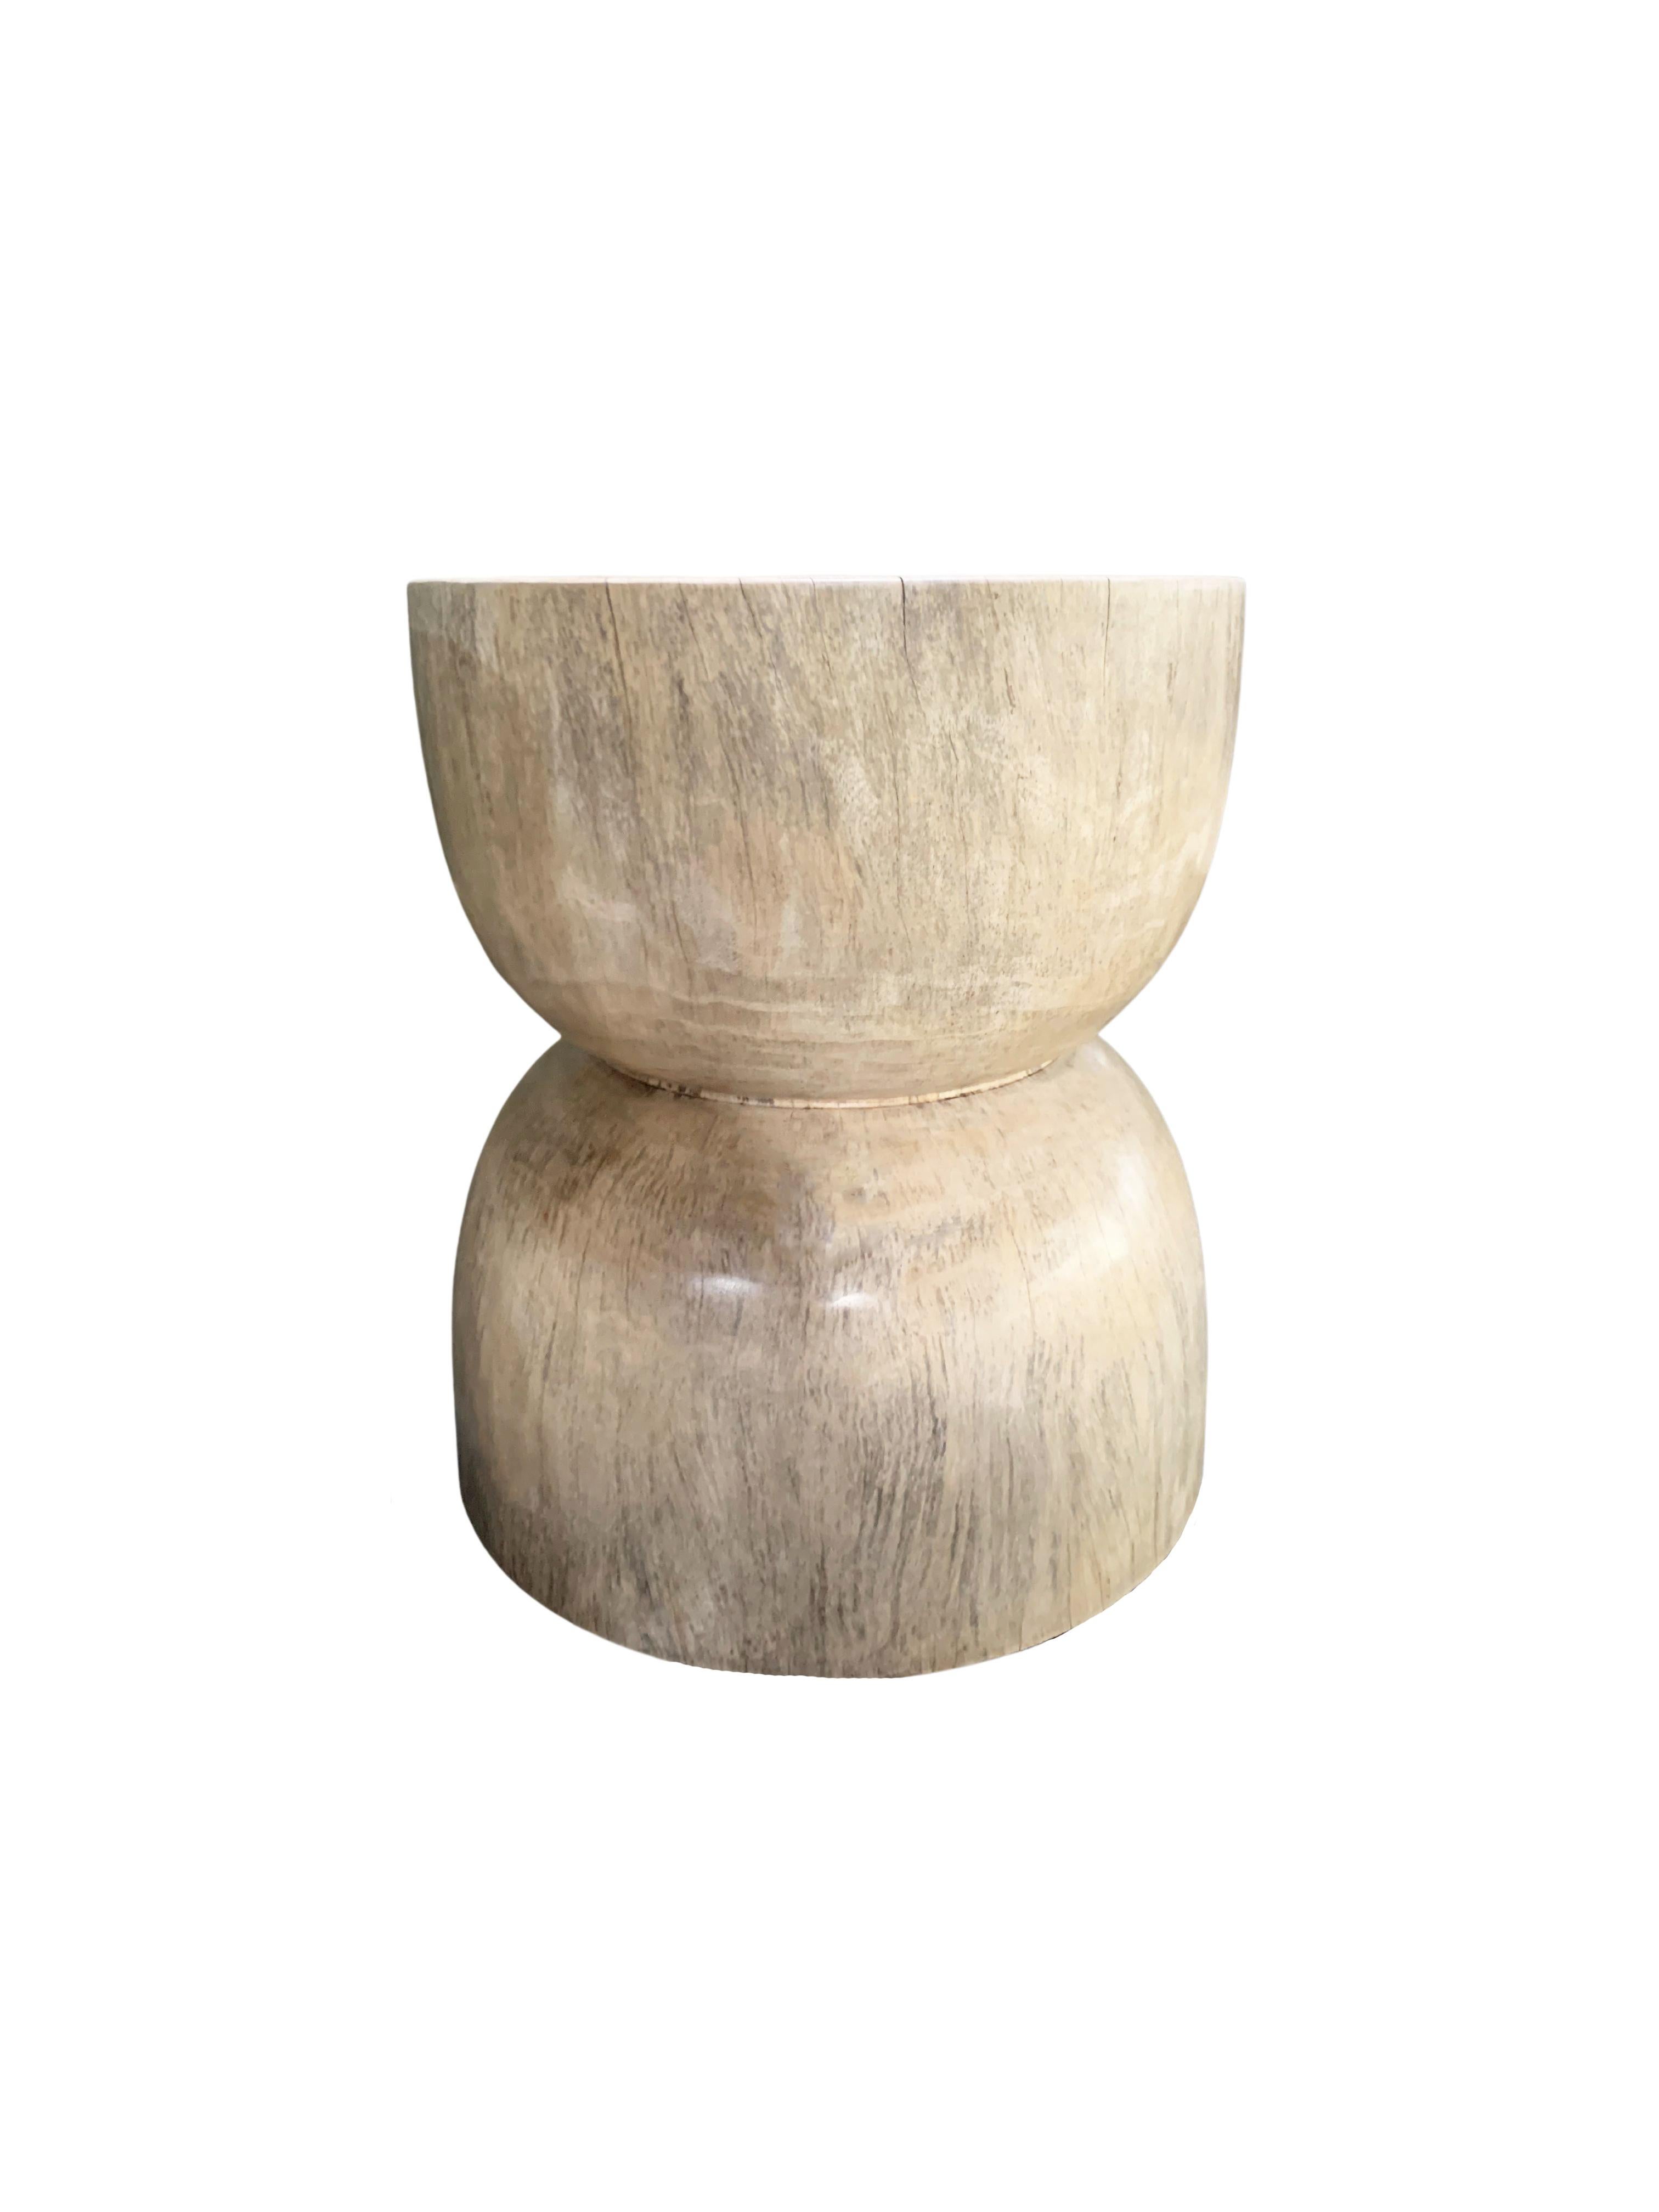 A wonderfully sculptural round side table or stool. Its neutral pigment makes it perfect for any space. A uniquely sculptural and versatile piece certain to invoke conversation. It was crafted from a solid block of tamarind wood and has a smooth